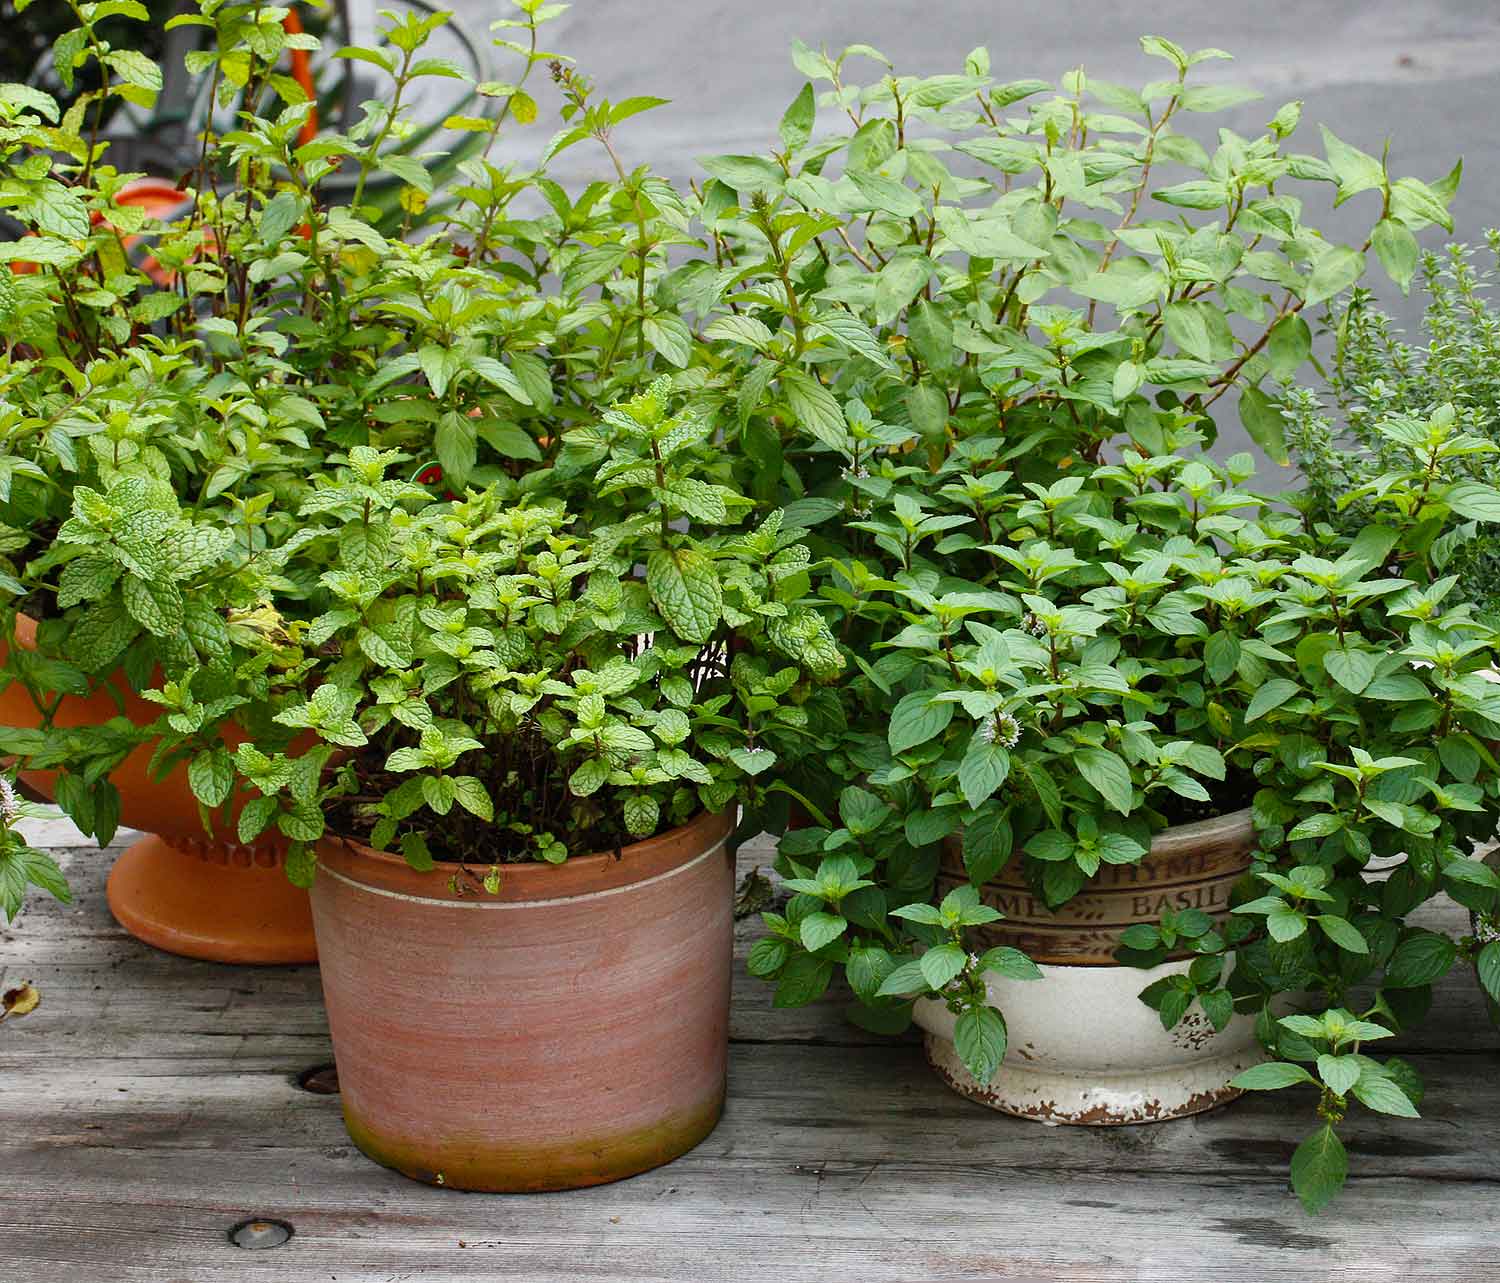 Mint varieties in pots on a potting bench.